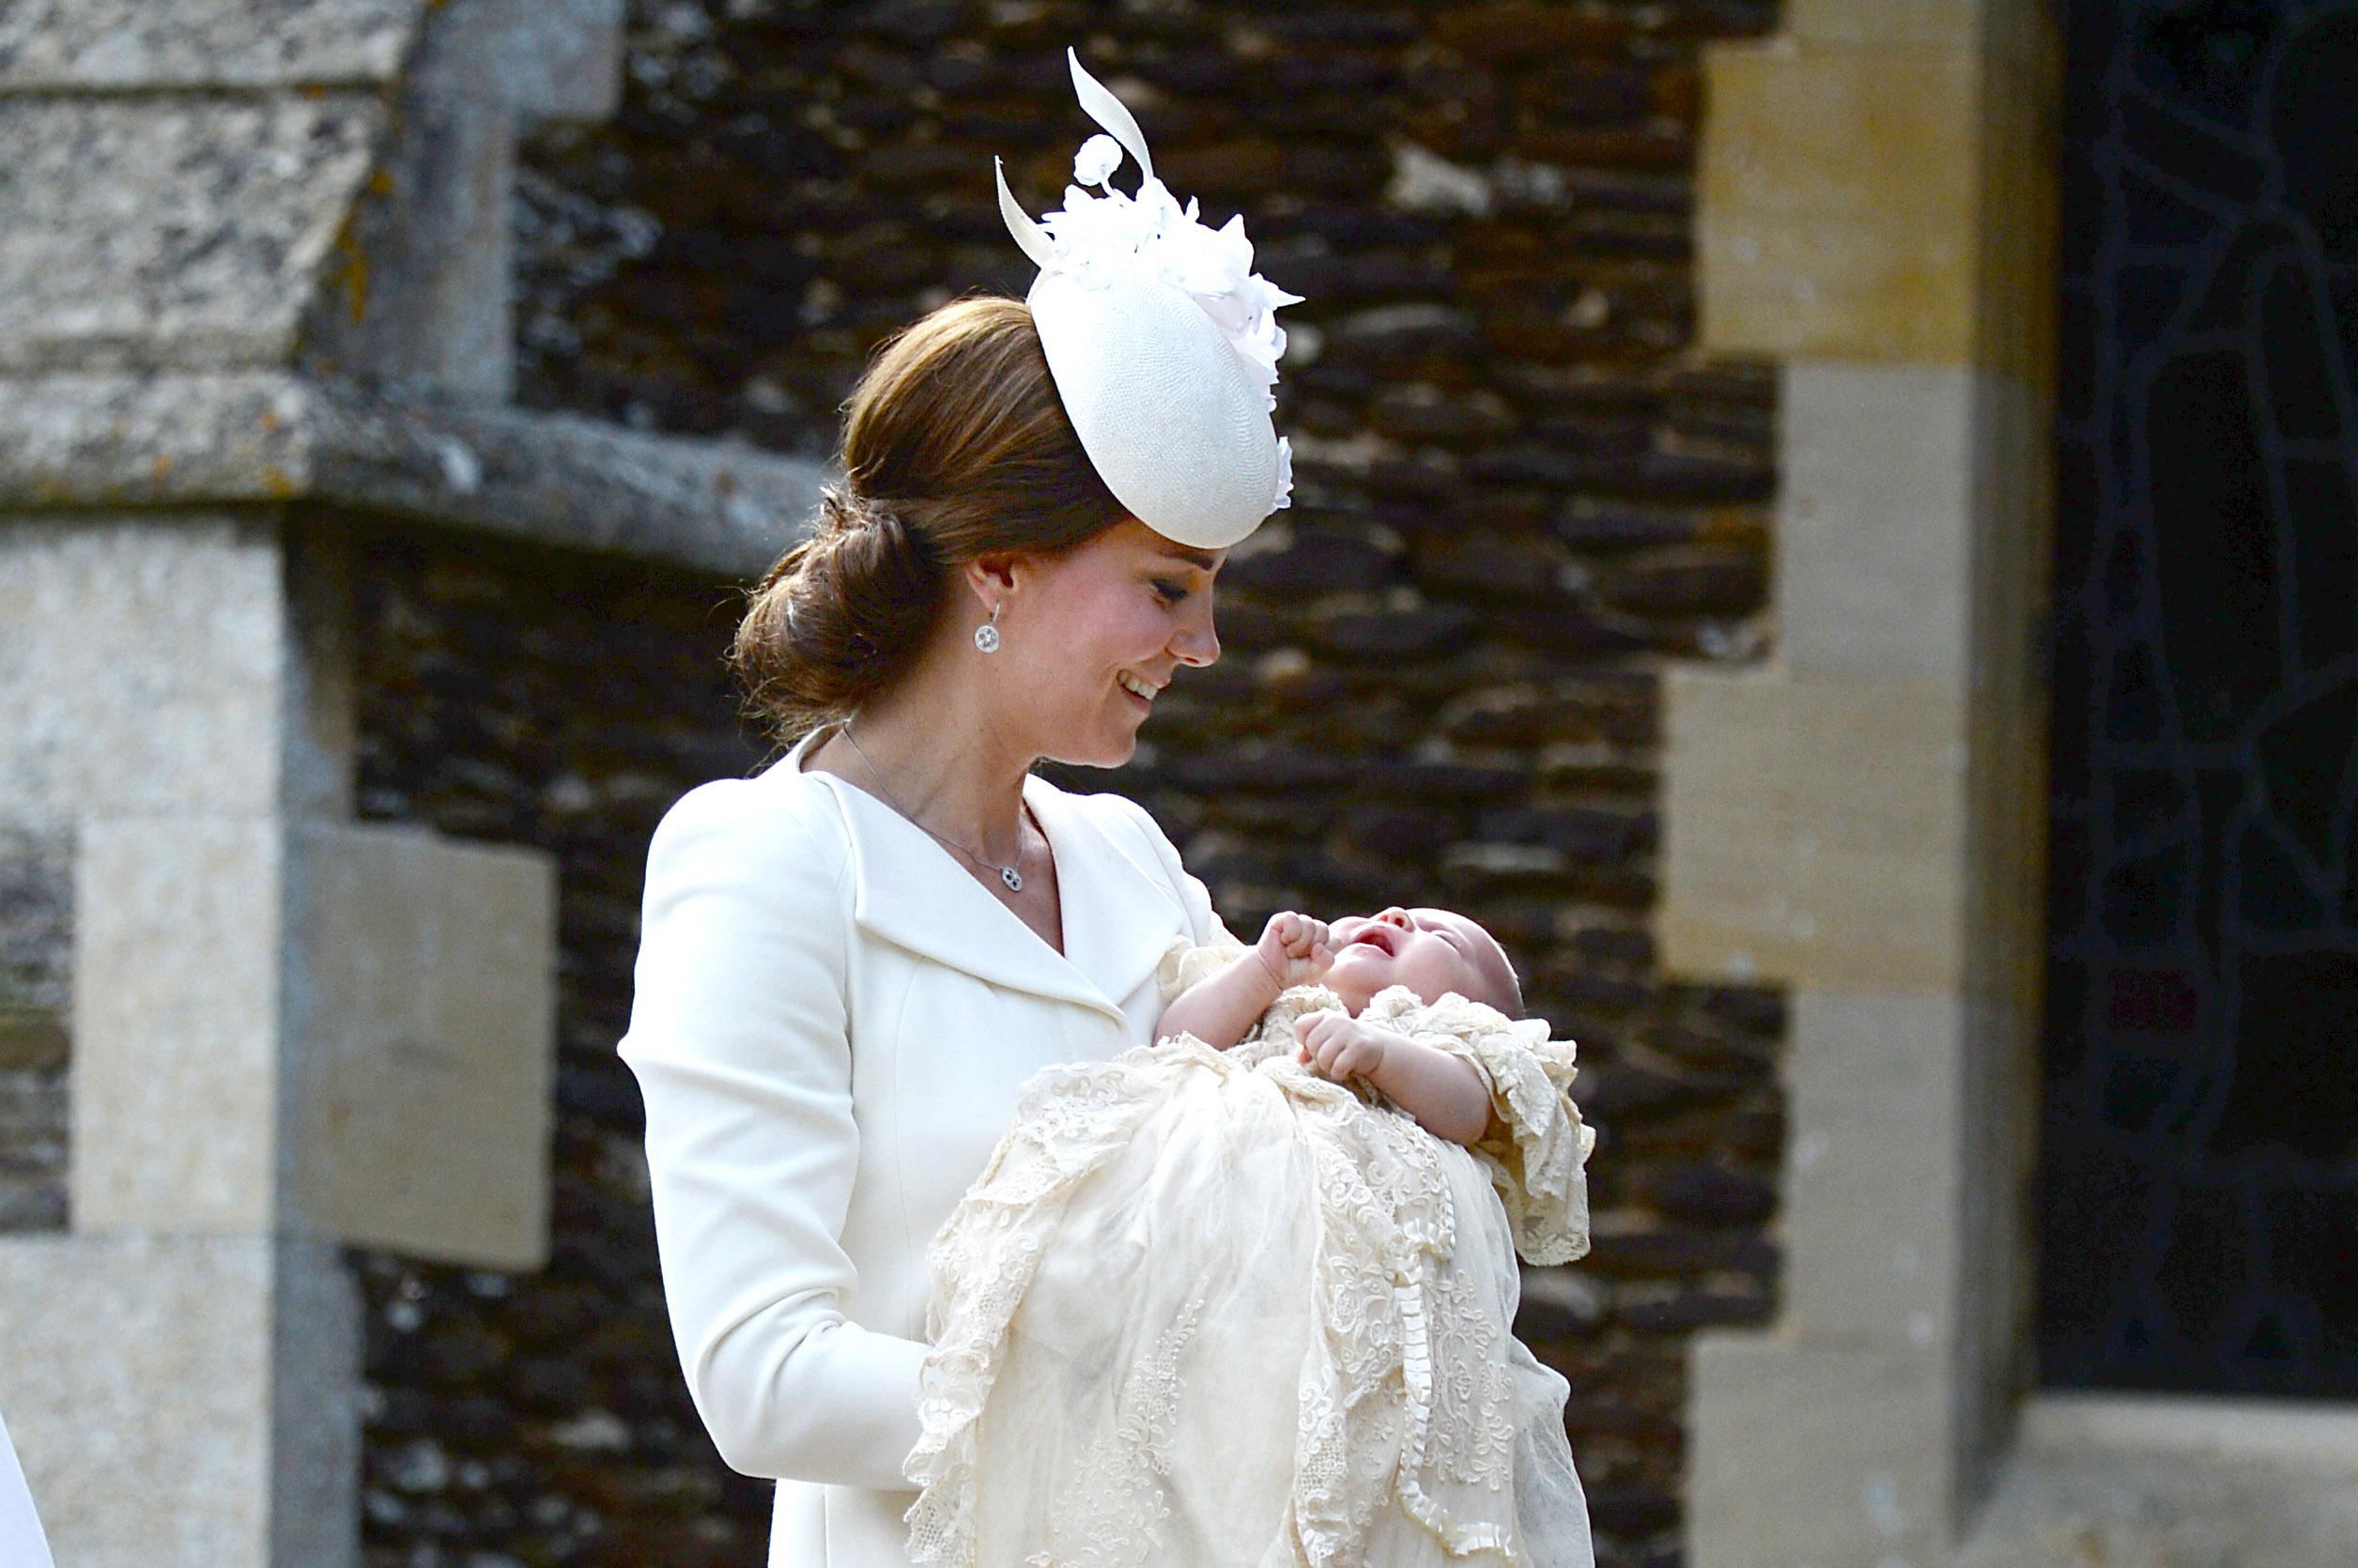 Catherine, Duchess of Cambridge and Princess Charlotte of Cambridge arrive at the Church of St Mary Magdalene on the Sandringham Estate for the Christening of Princess Charlotte on July 5, 2015. (WPA Pool—Getty Images)